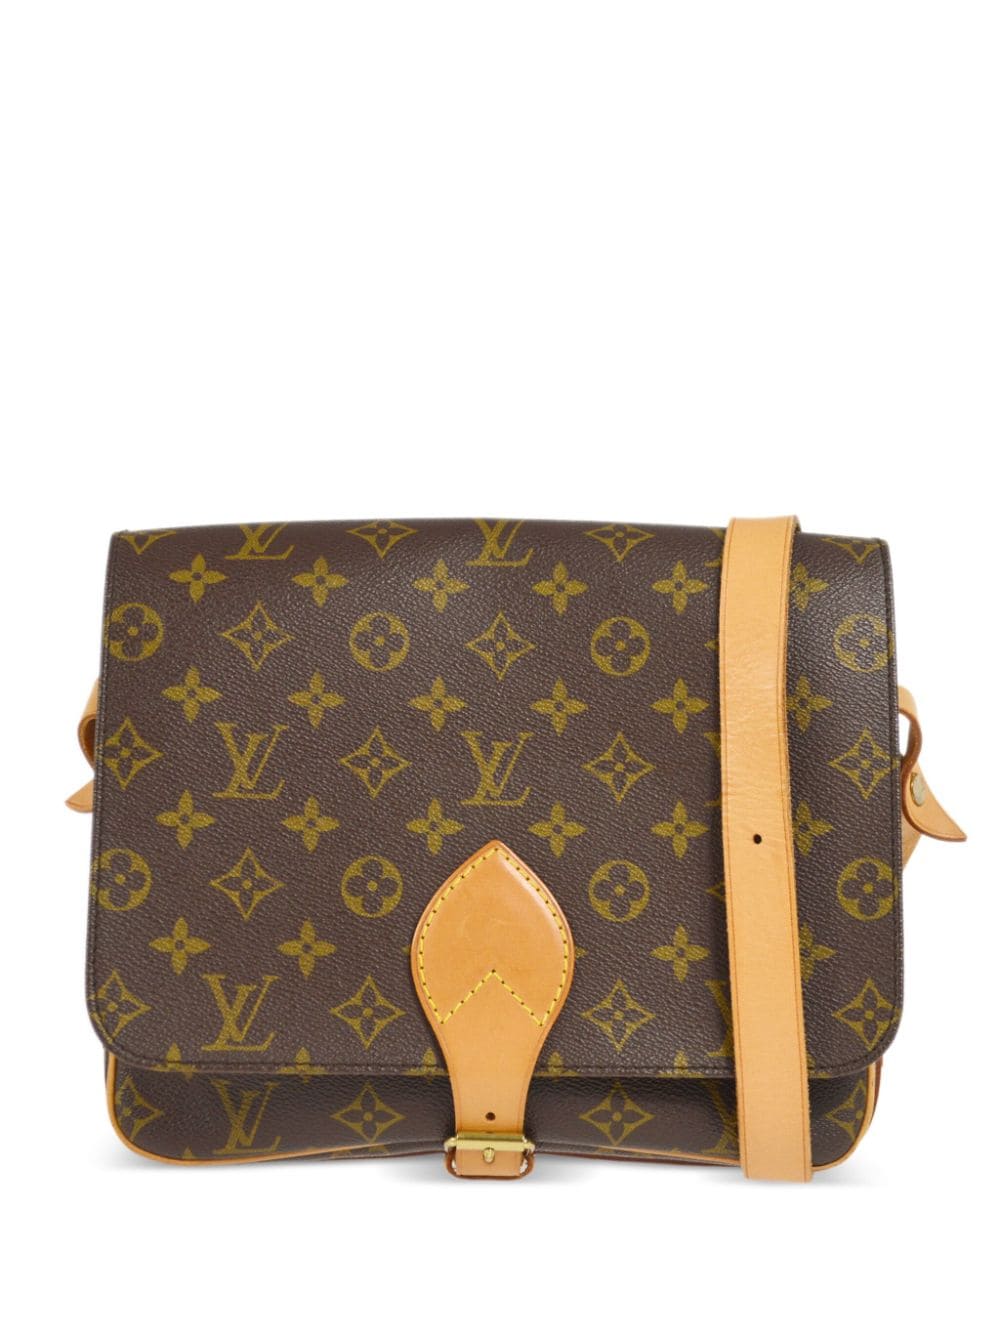 Louis Vuitton 2002 Pre-owned America's Cup Shoulder Bag - Yellow